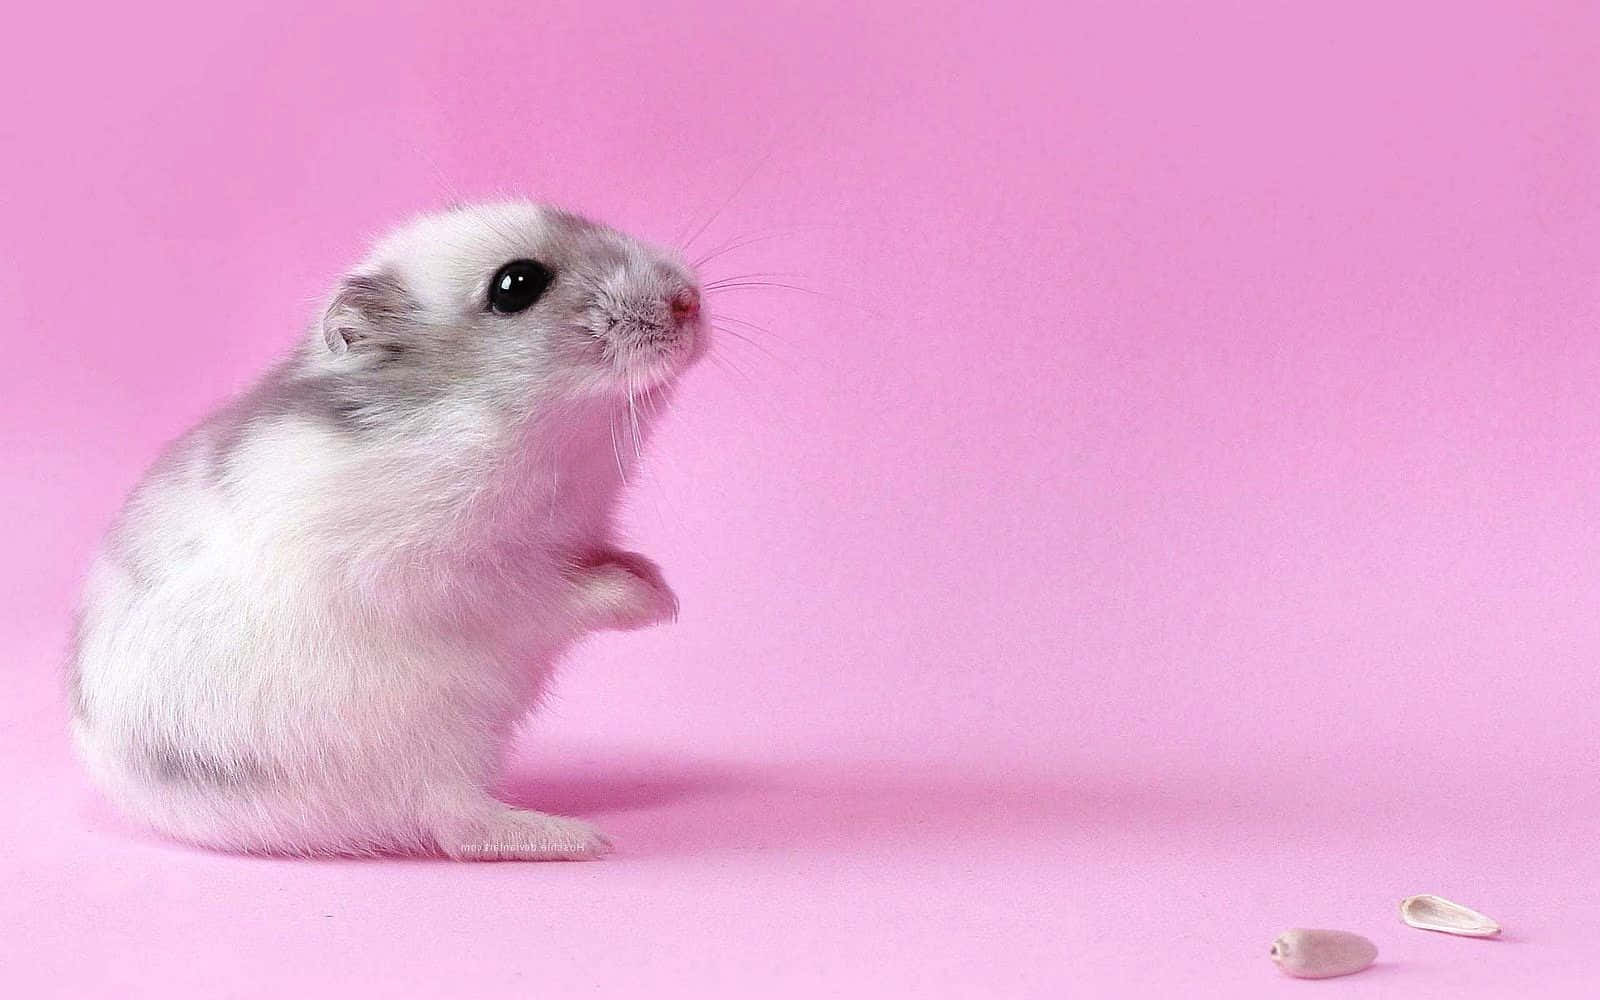 A Small White Hamster Is Standing On A Pink Background Wallpaper